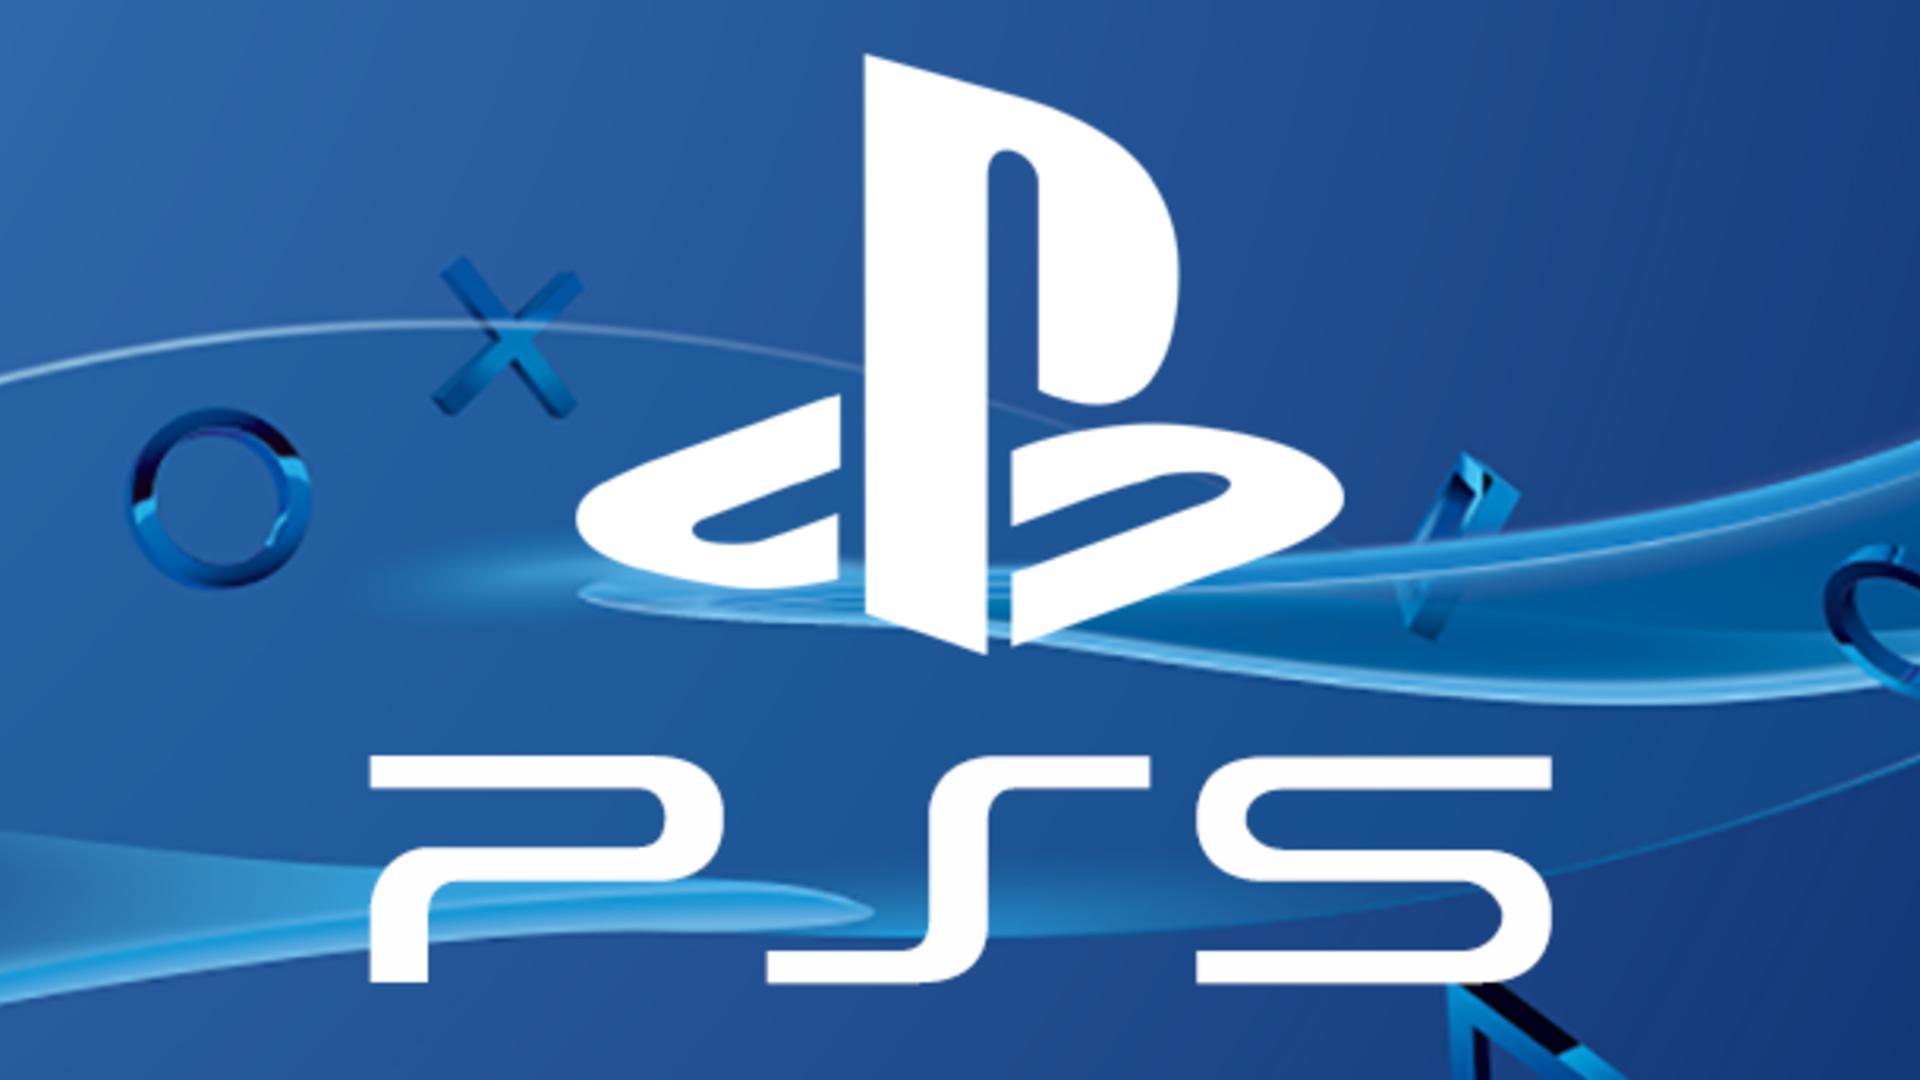 Did The Godfall Give Us A Glimpse At The PS5 Logo